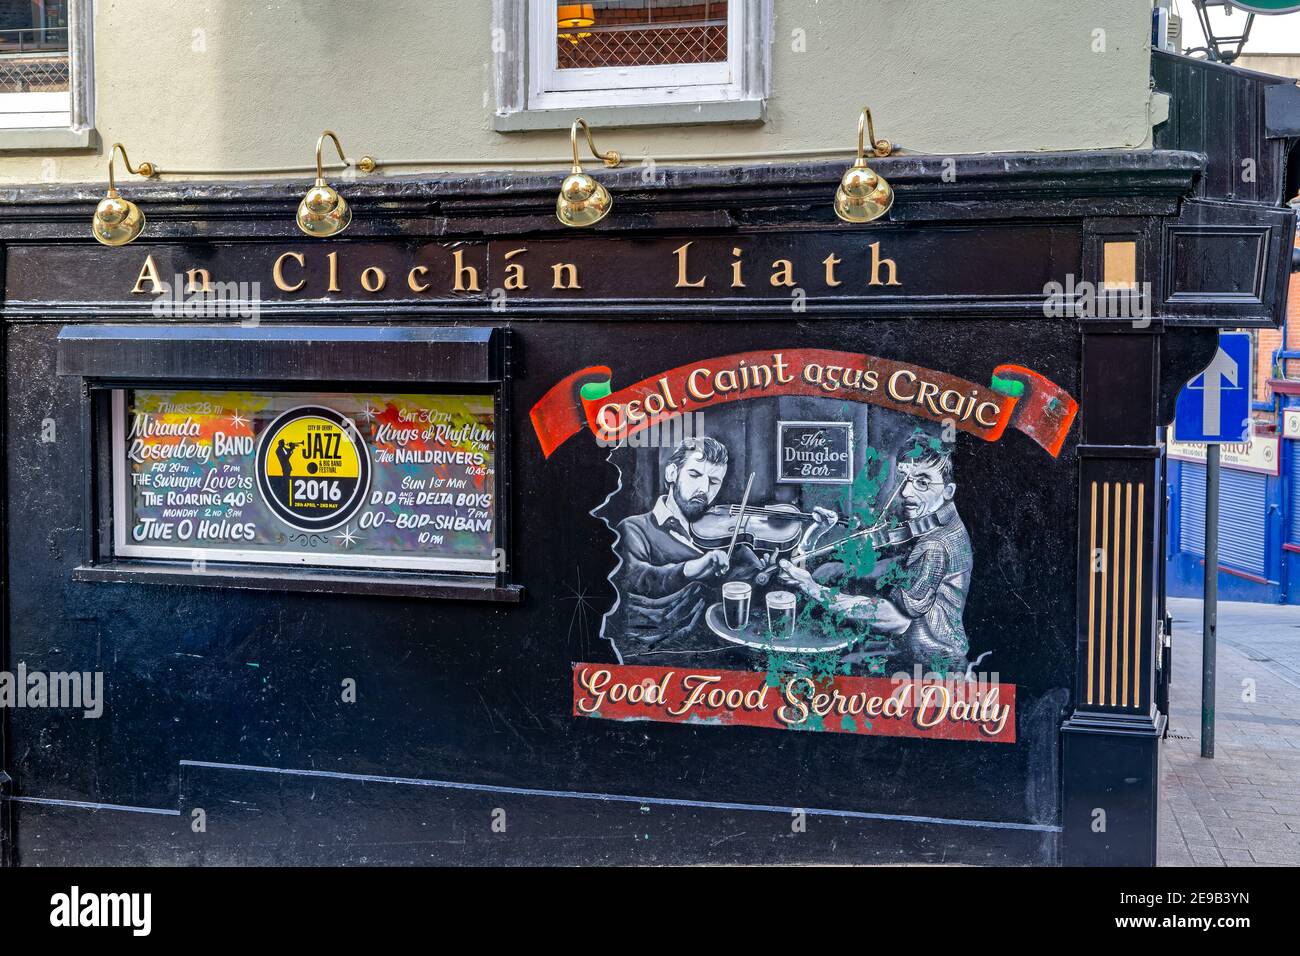 Londonderry, Northern Ireland, UK. 28th April, 2016. Dungloe Bar (An Clochán Liath) in Londonderry, Northern Ireland, UK. Stock Photo